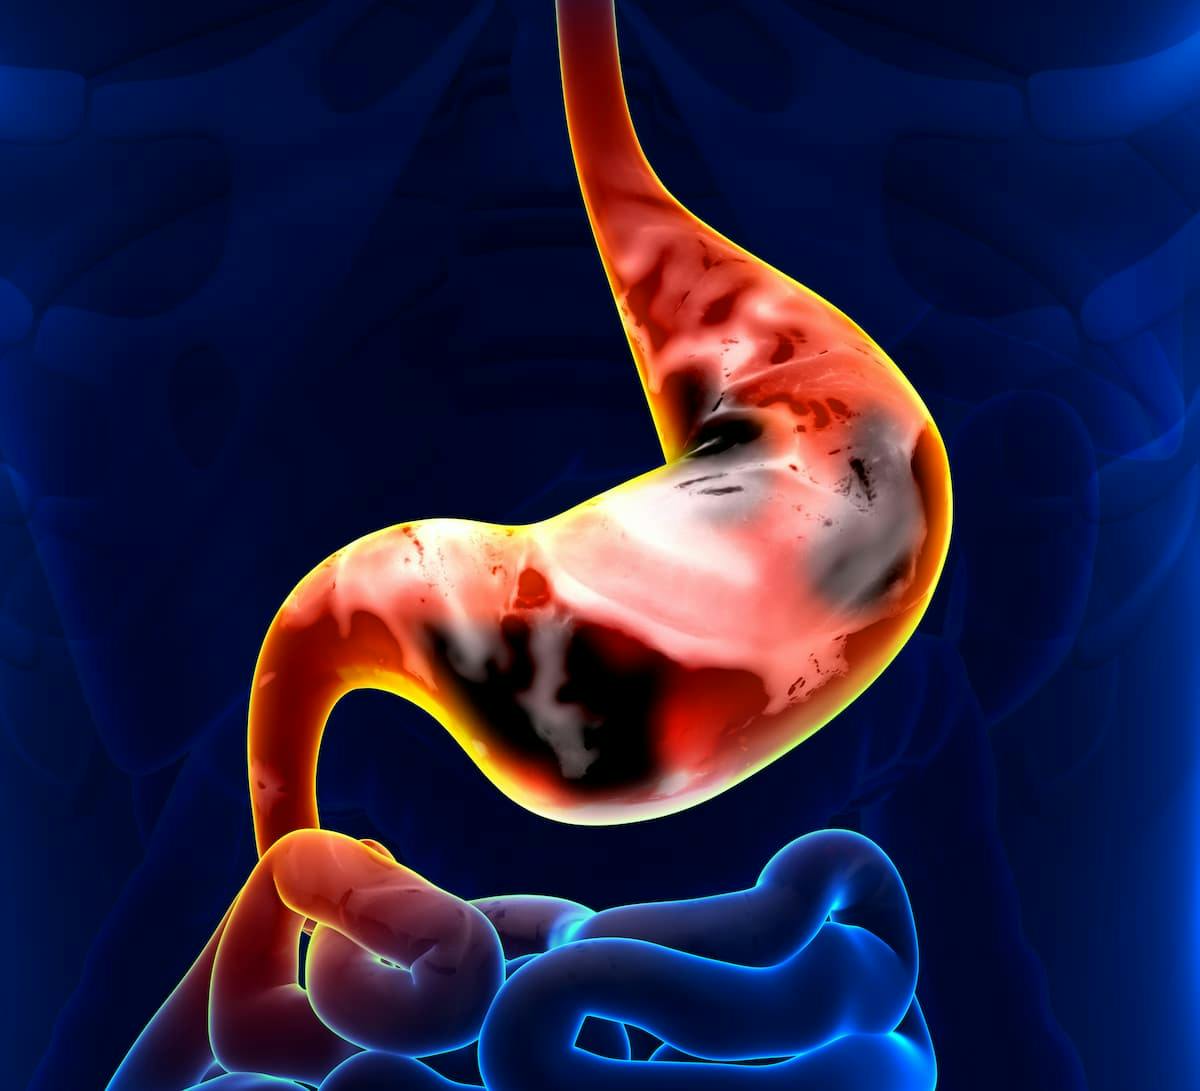 Over half of the patients with HER2-negative gastric or gastroesophageal junction adenocarcinoma achieve a major pathological complete response following treatment with sintilimab plus FLOT in a phase 2 trial.